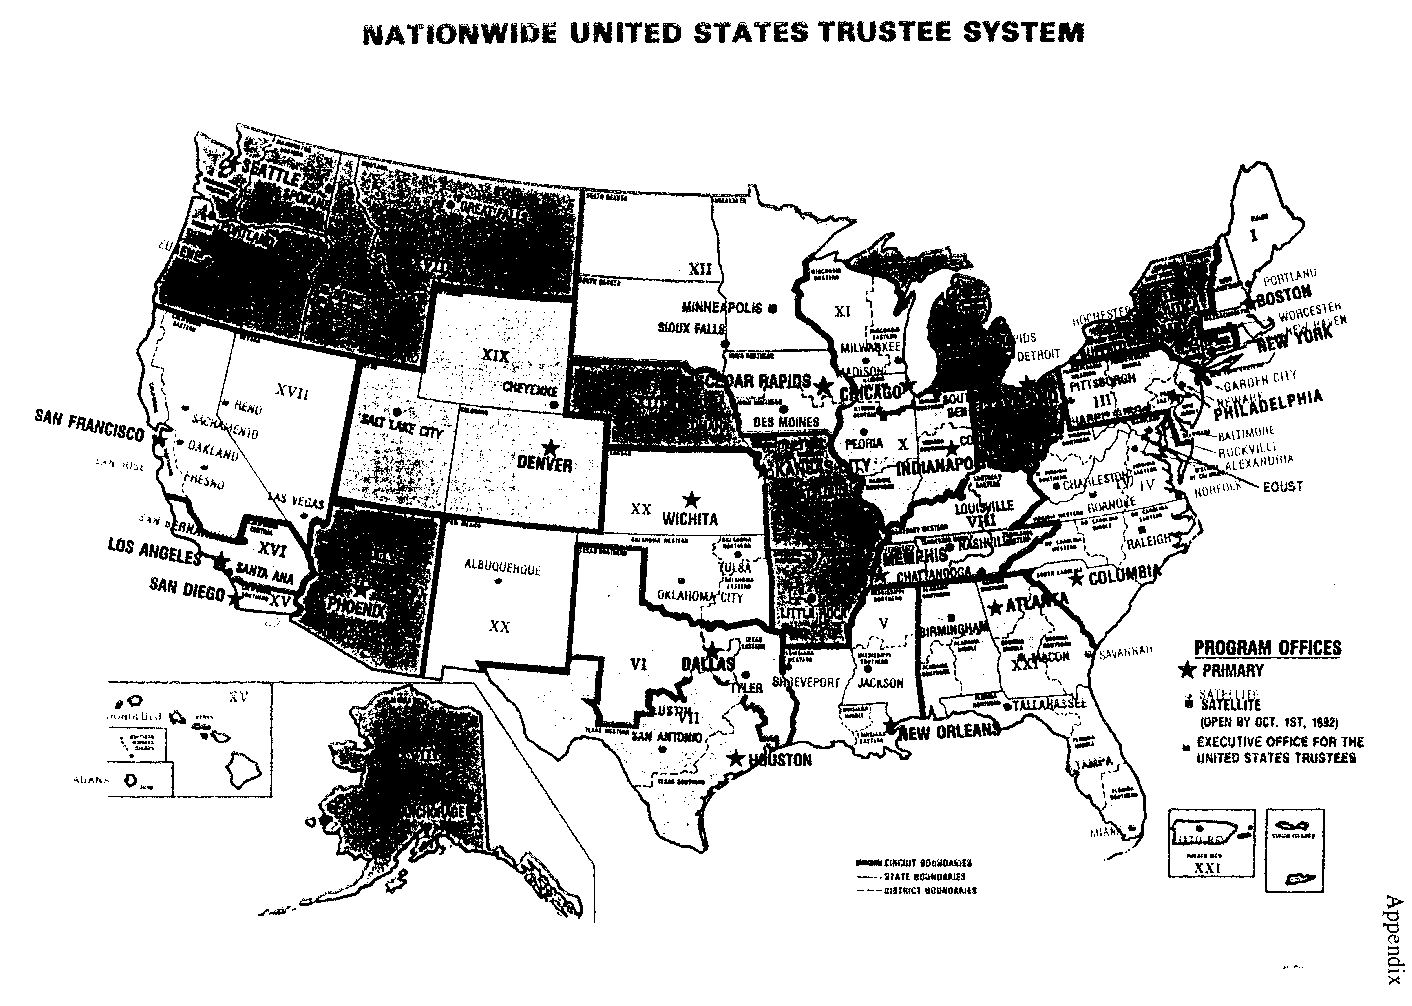 NATIONWIDE UNITED STATES TRUSTEE SYSTEM